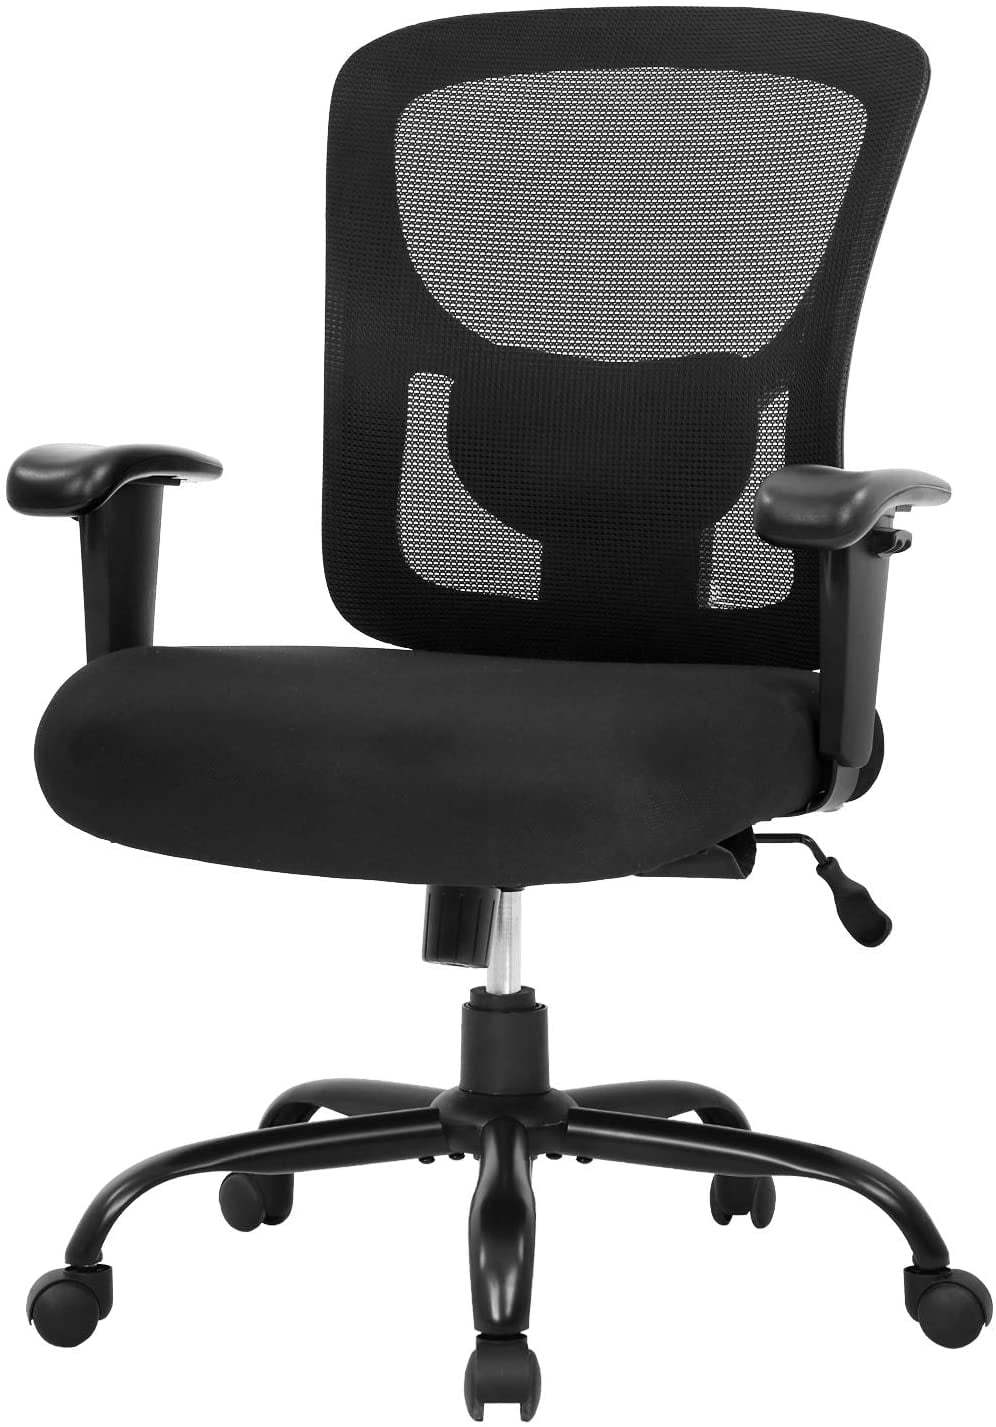 Executive Big & Tall Office Chair High Back Task Chair w/ Lumbar Support 